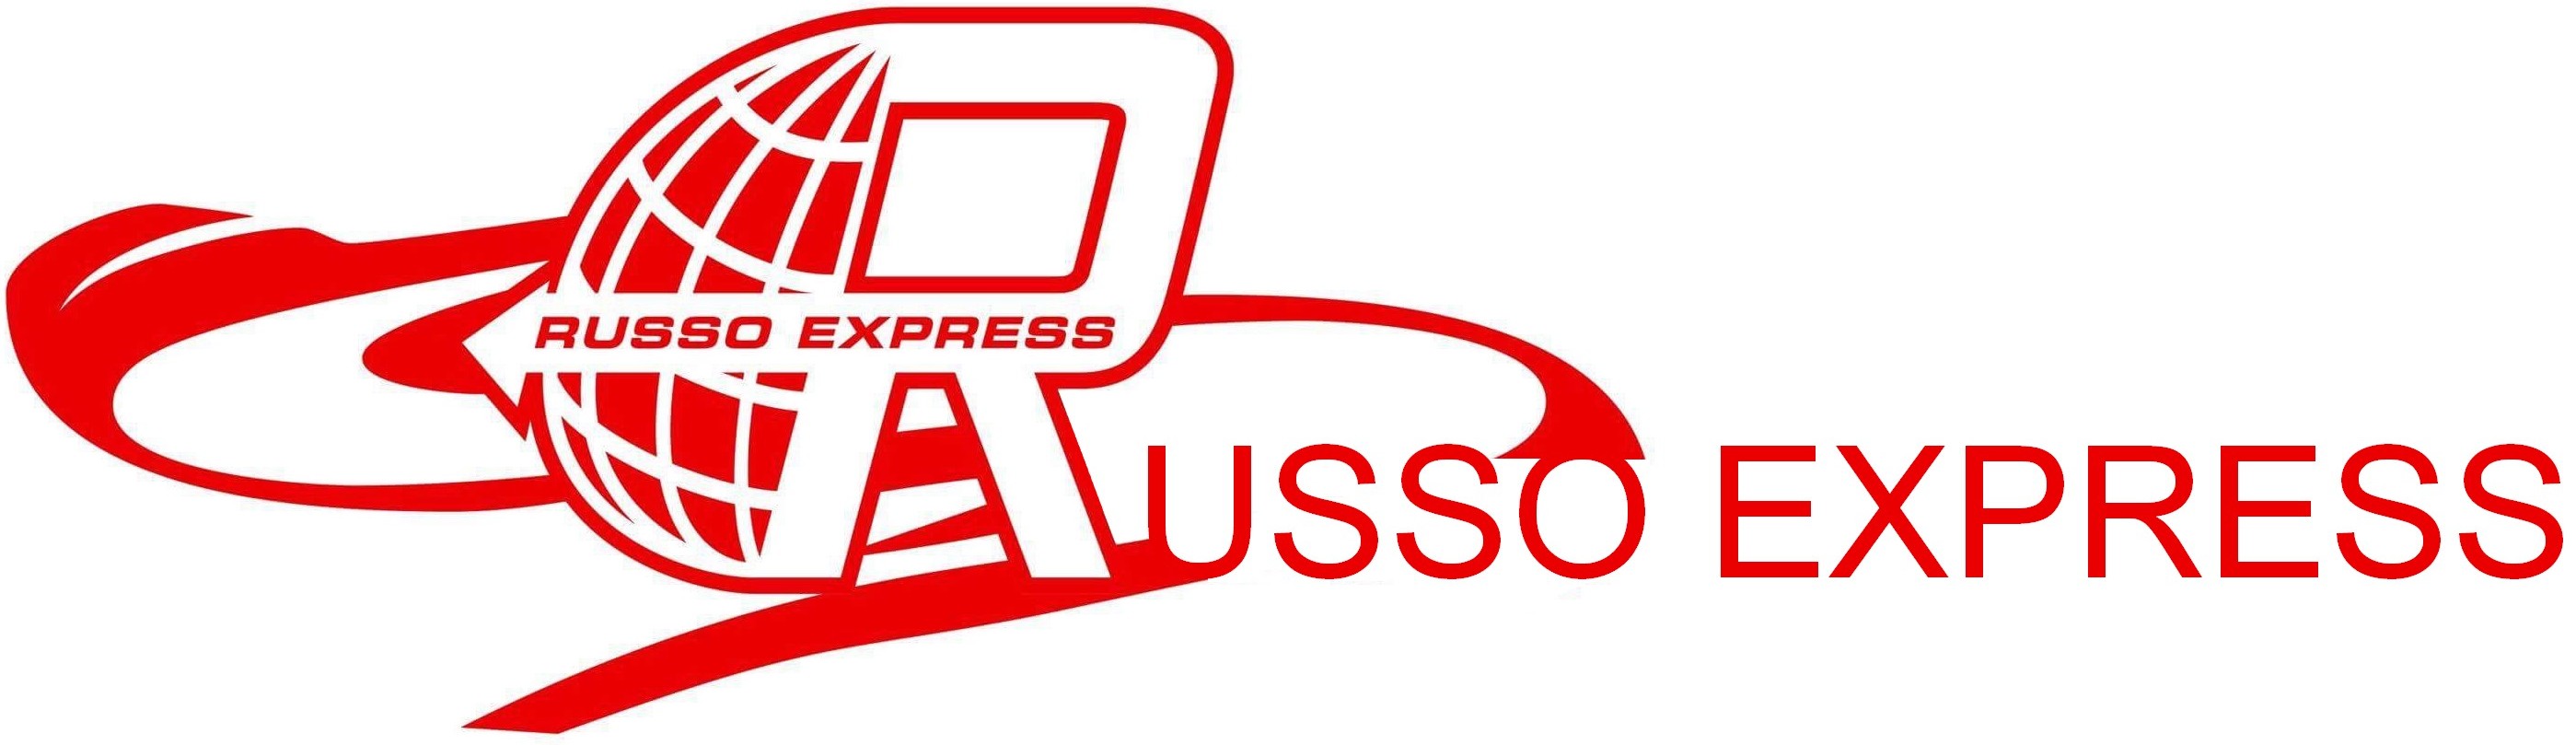 Russo Express